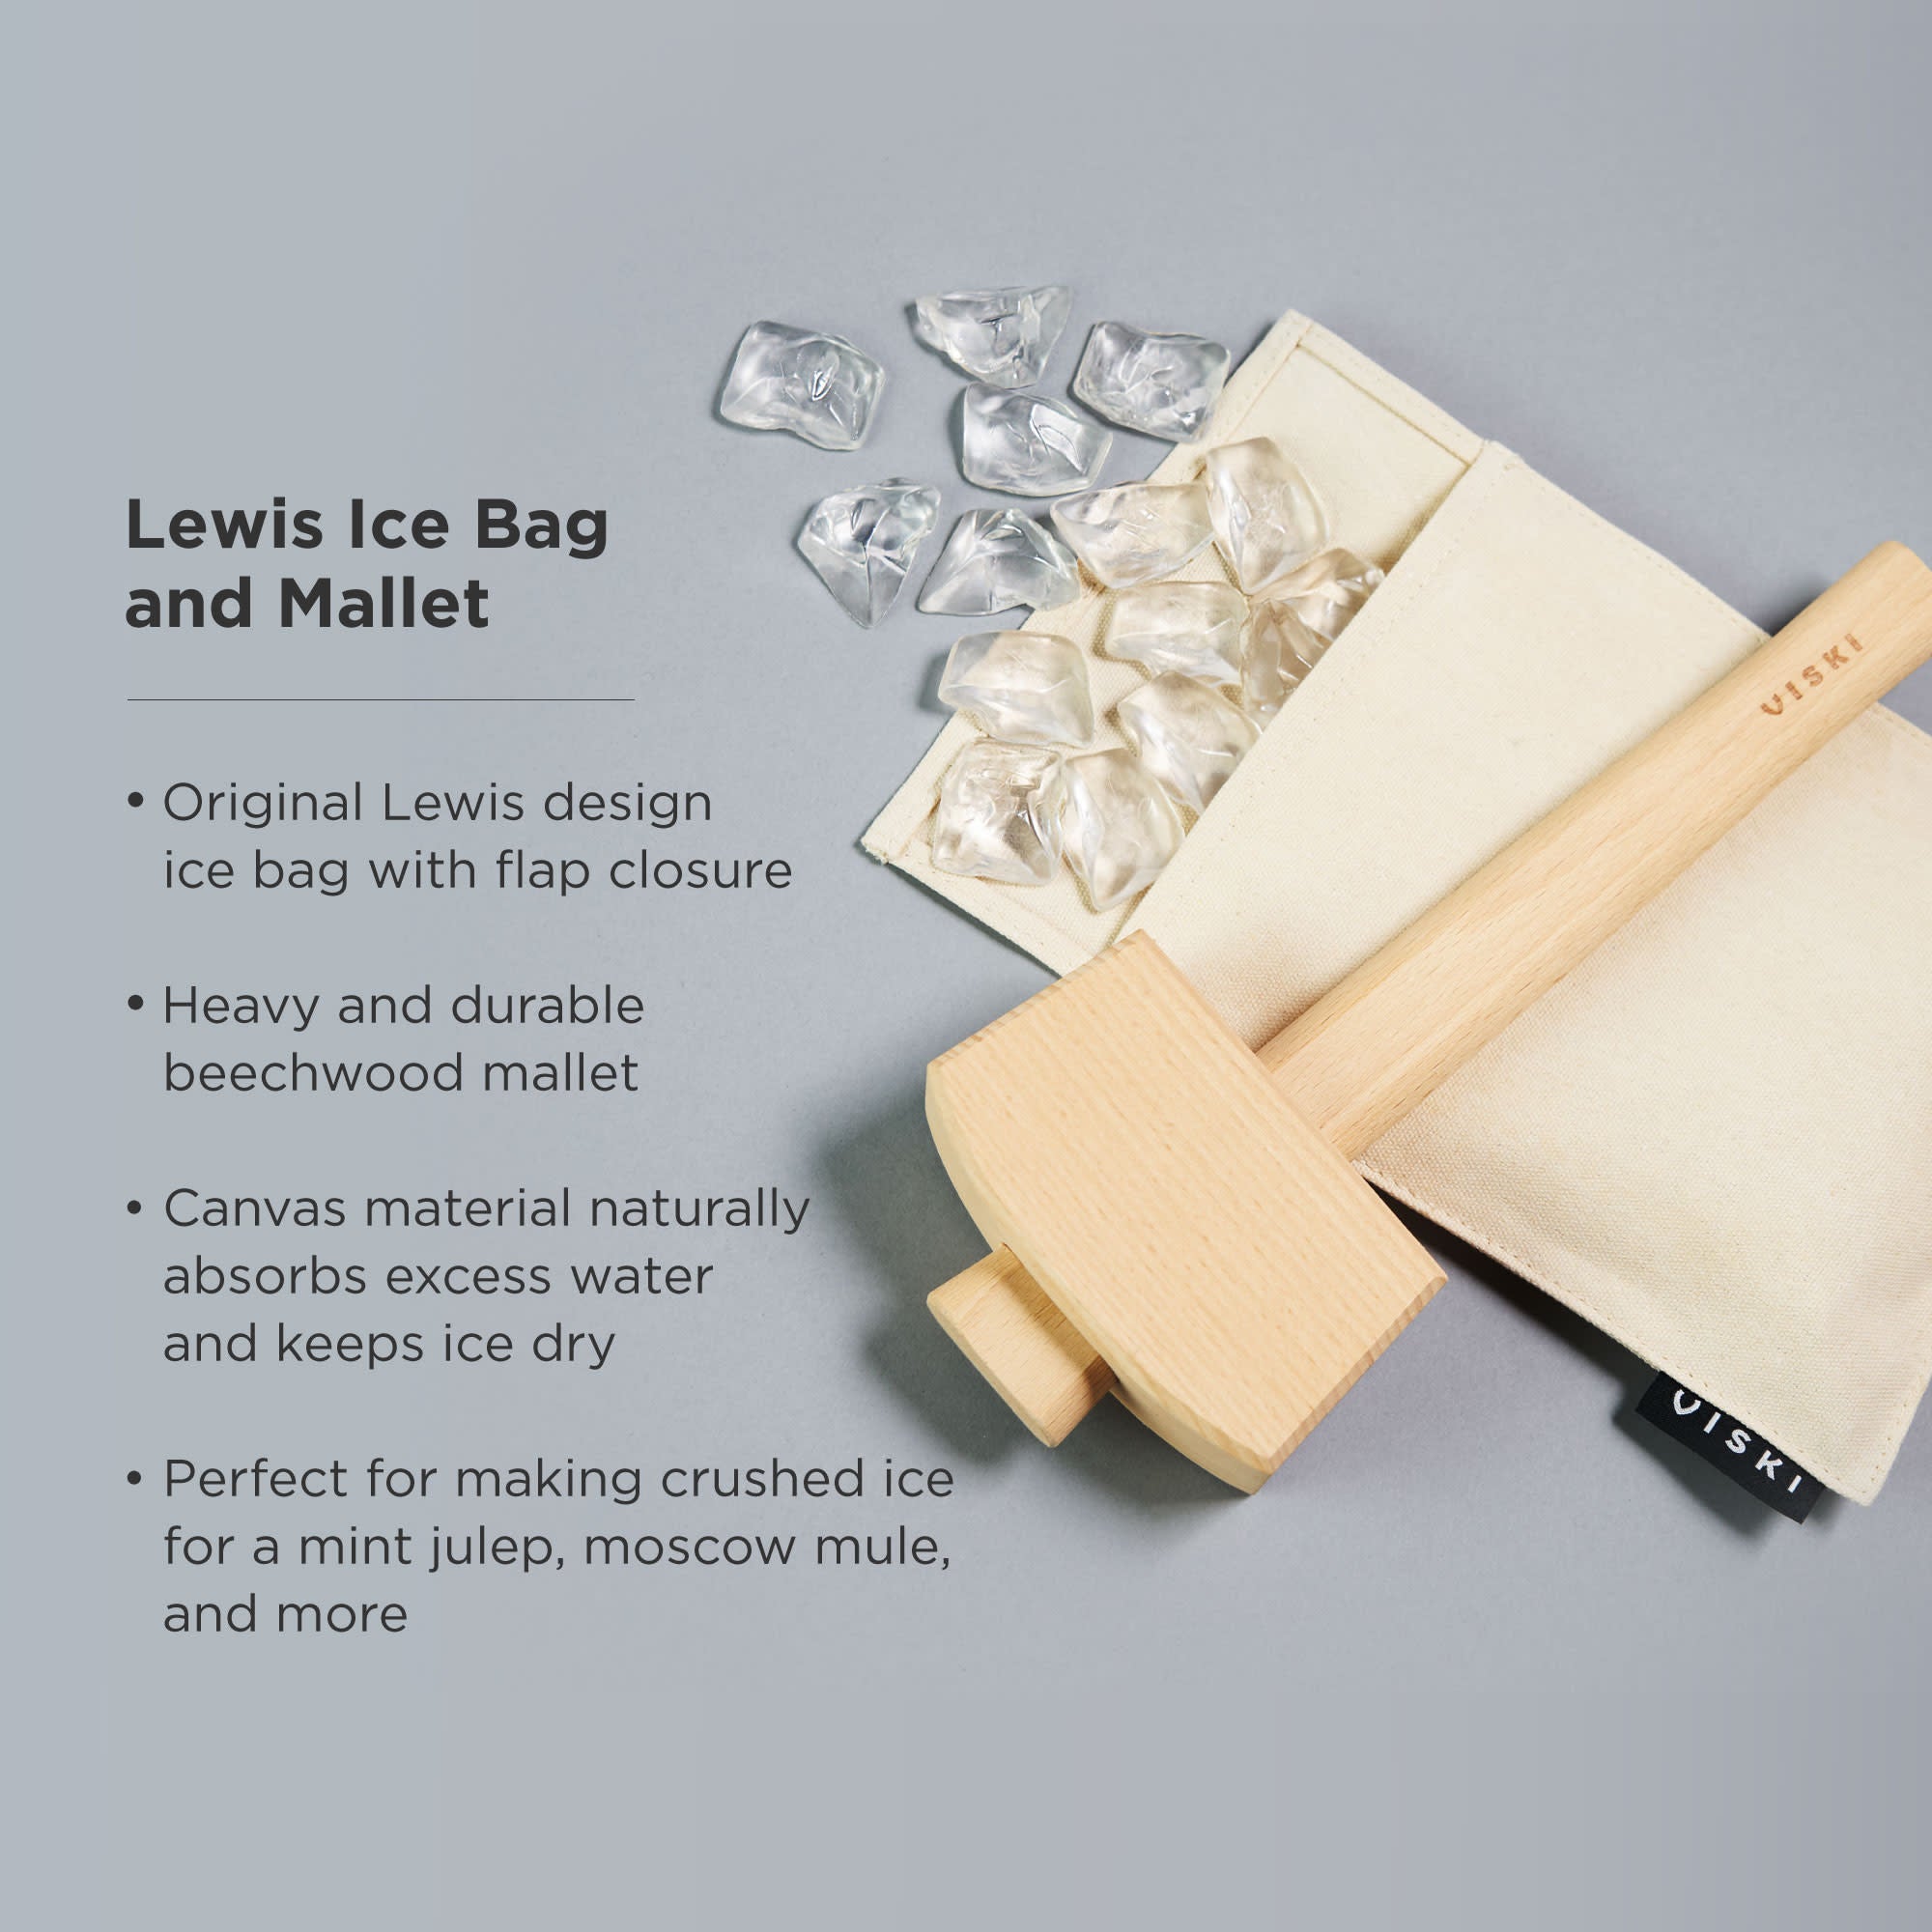 How To Make Crushed Ice With A Lewis Bag